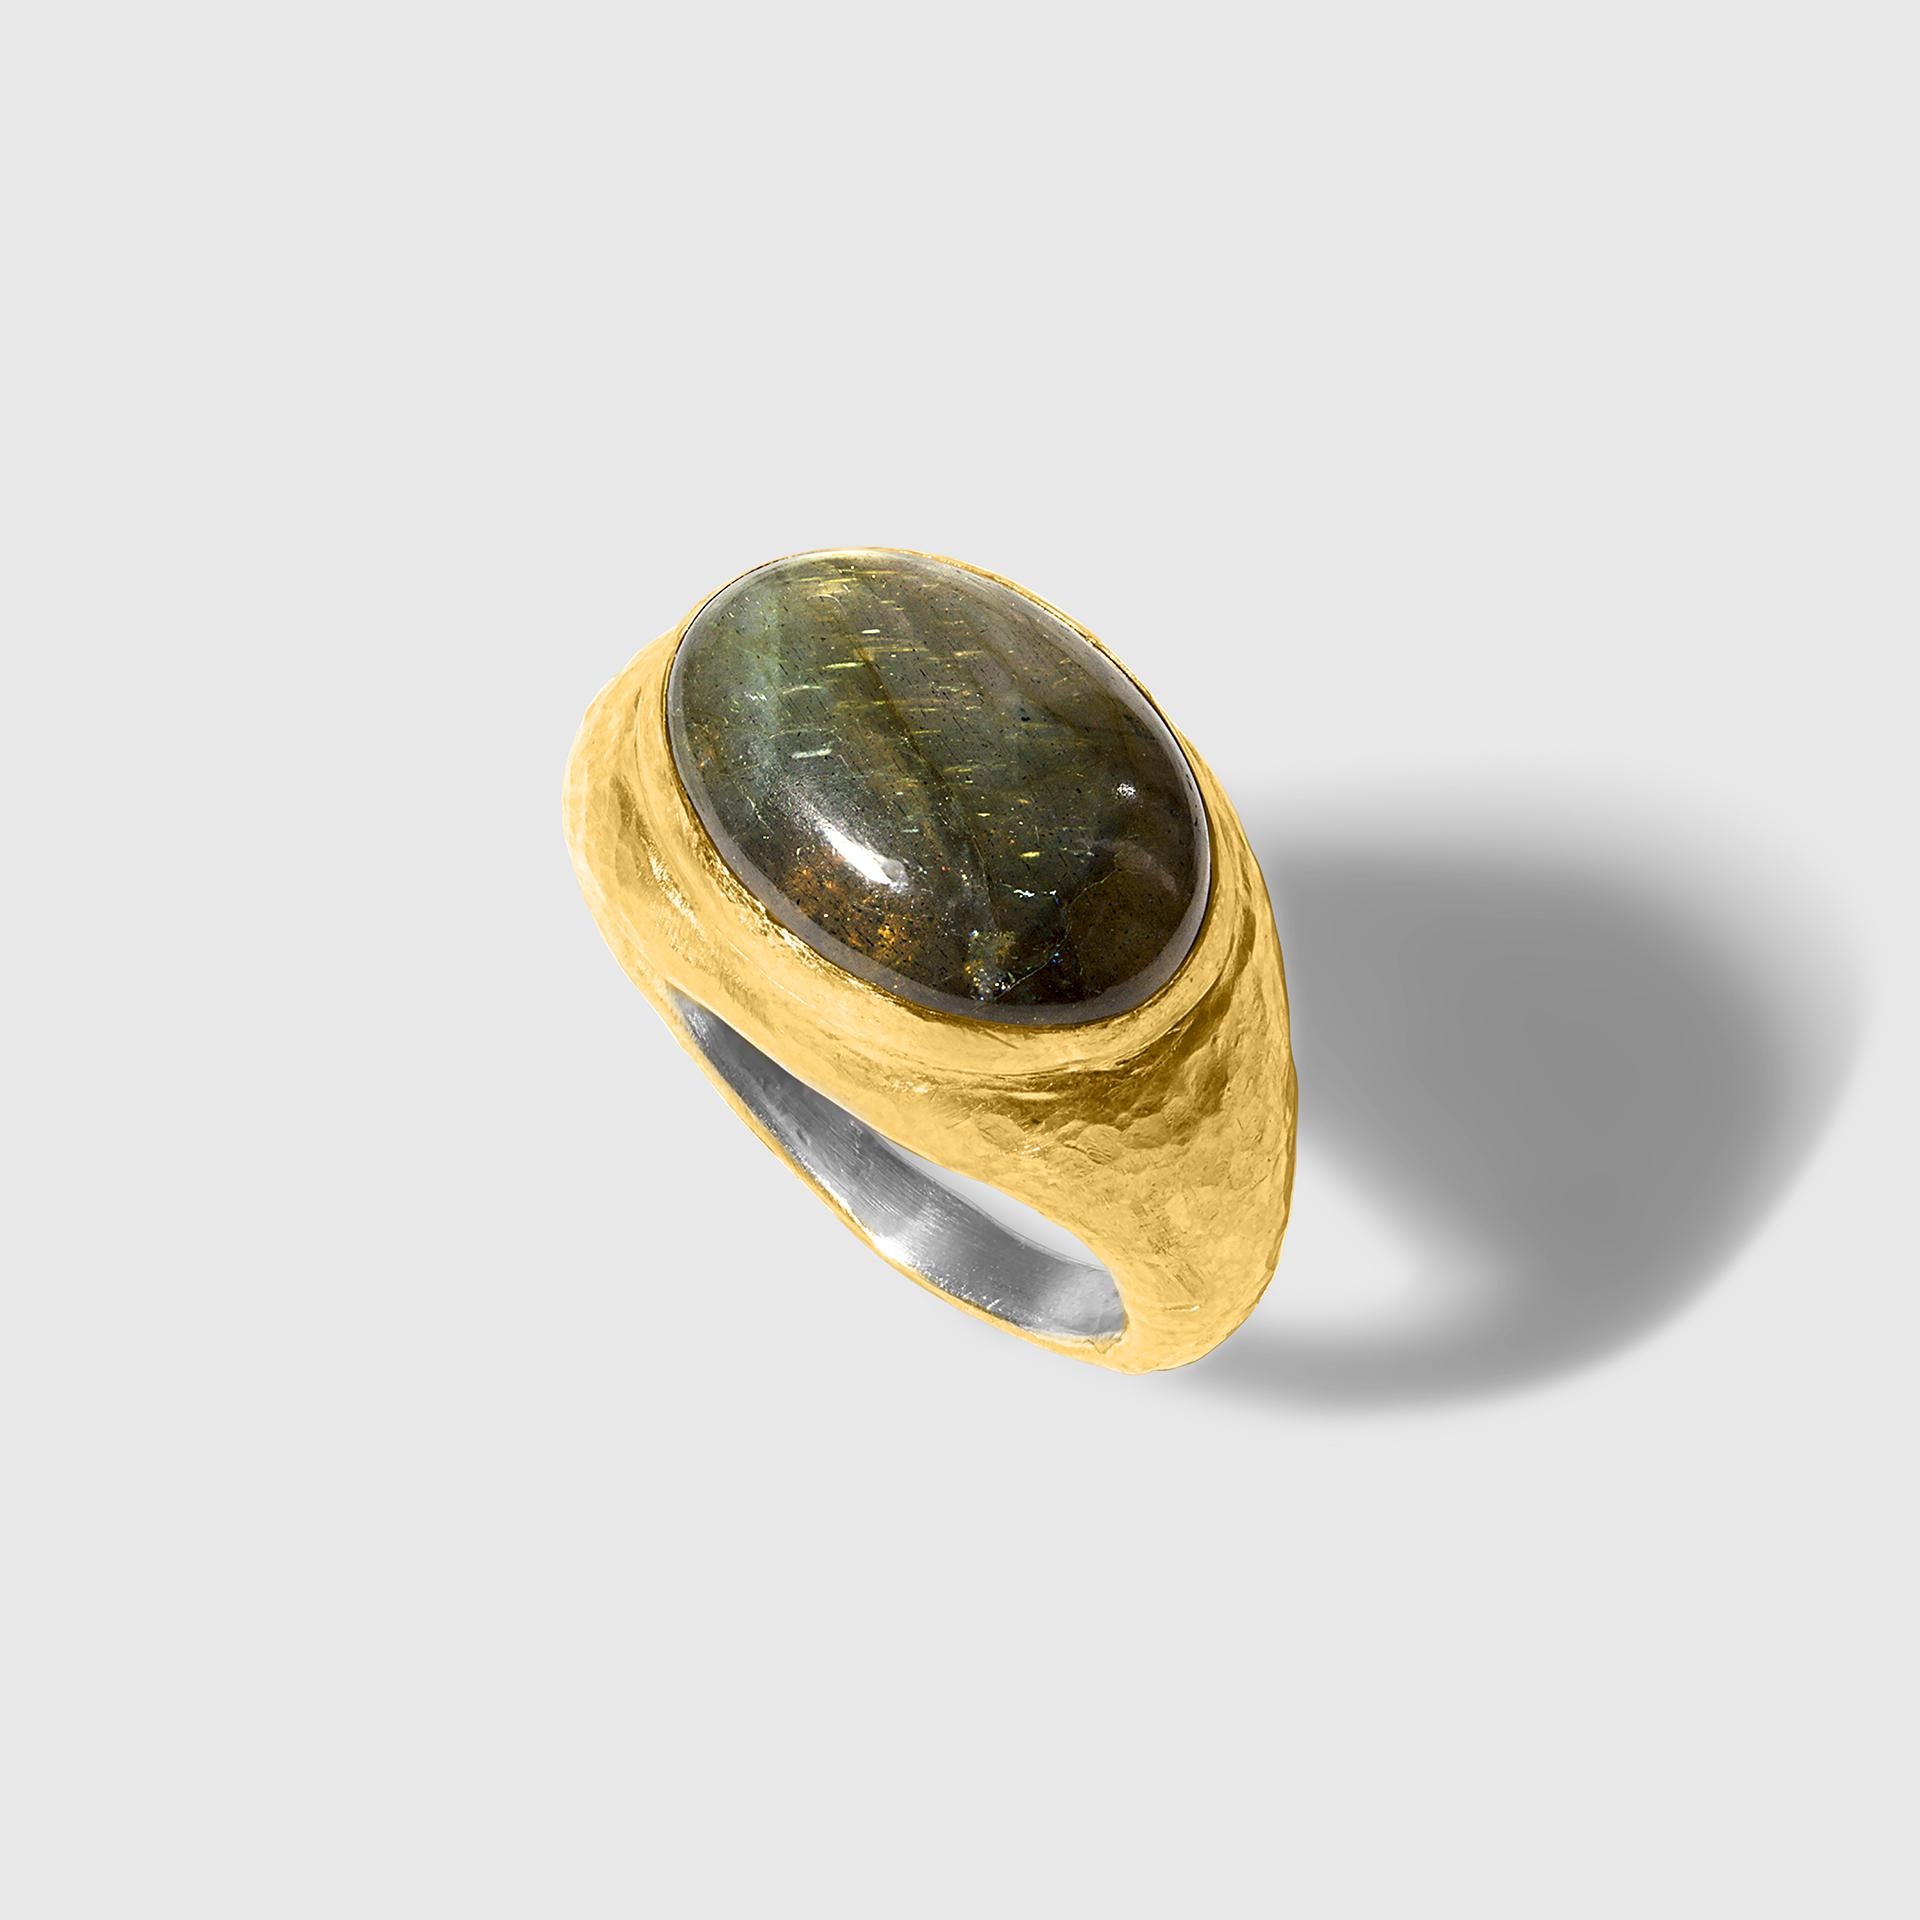 Large, Oval, Domed Labradorite Ring in 24kt Gold and Silver In New Condition For Sale In Bozeman, MT